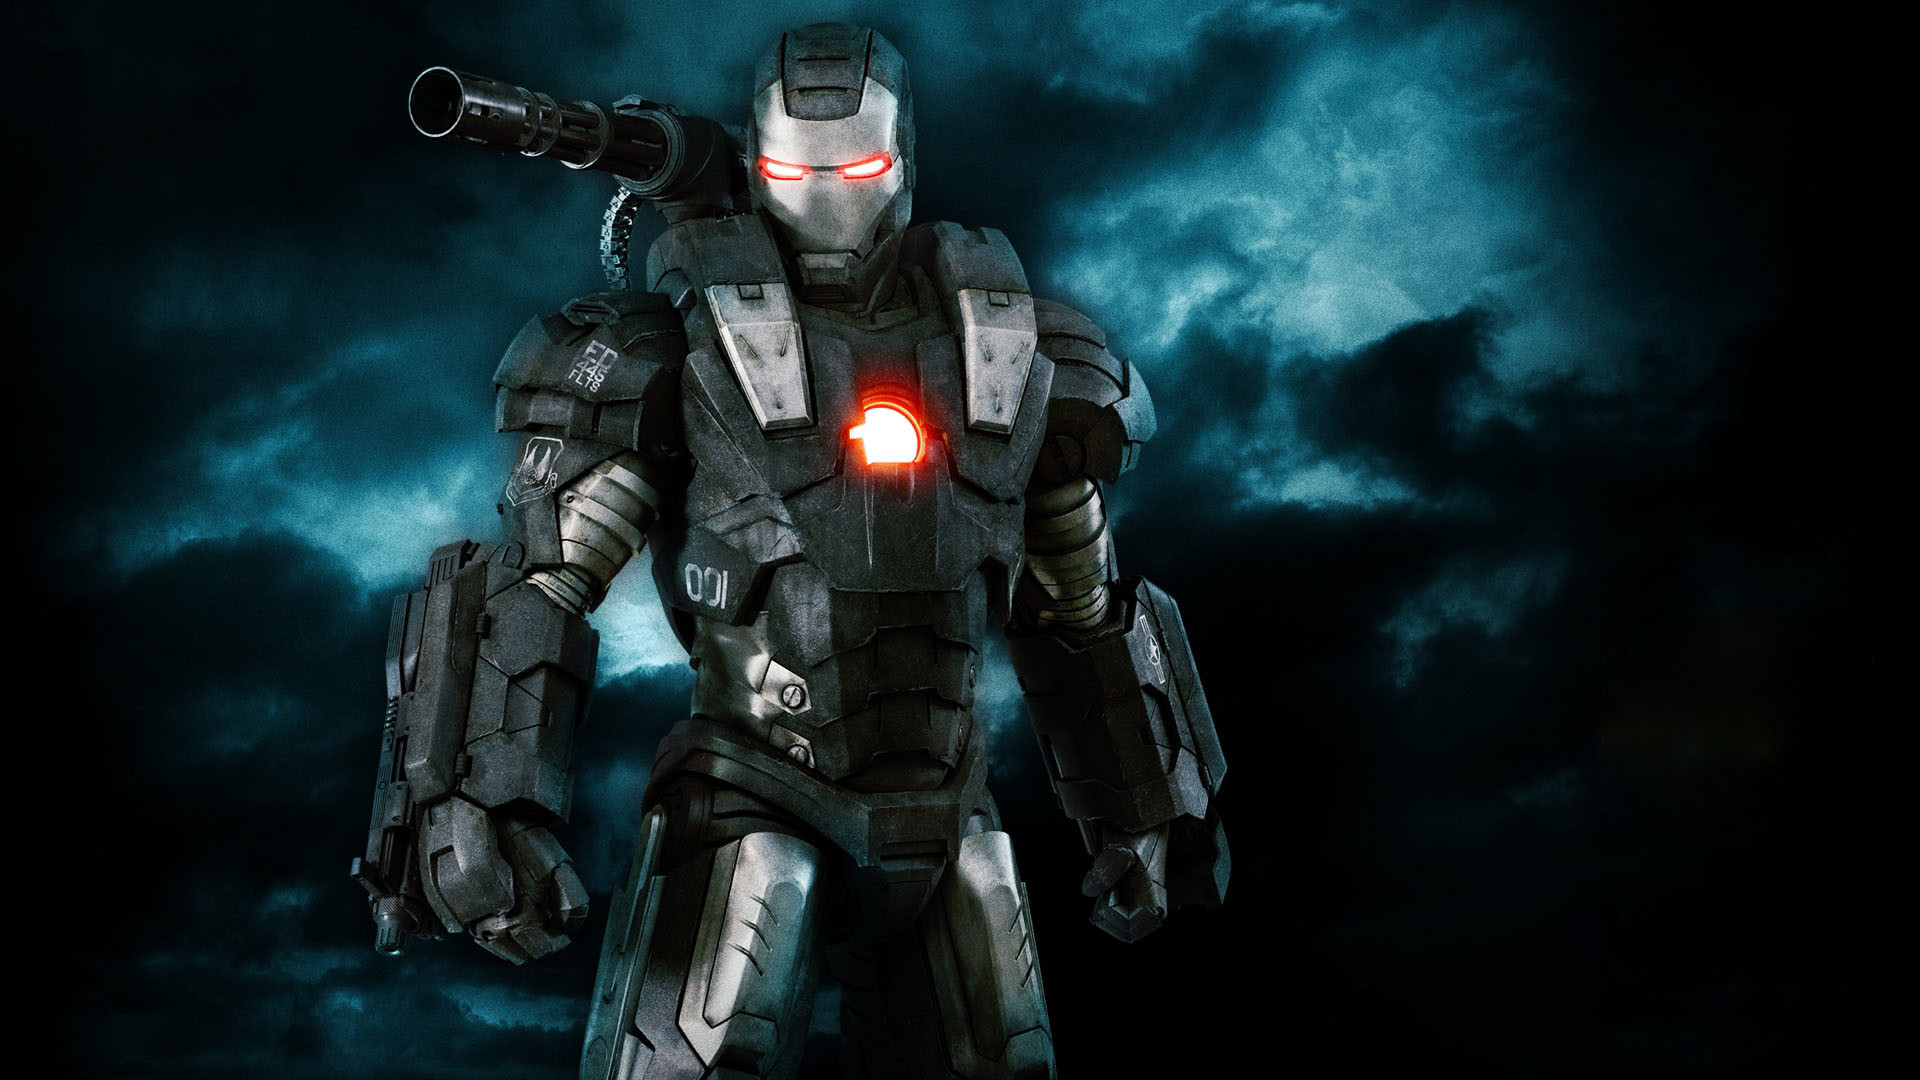 1920x1080 Cool Pictures Iron Man 3 HD Wallpaper of Movie - hdwallpaper2013.